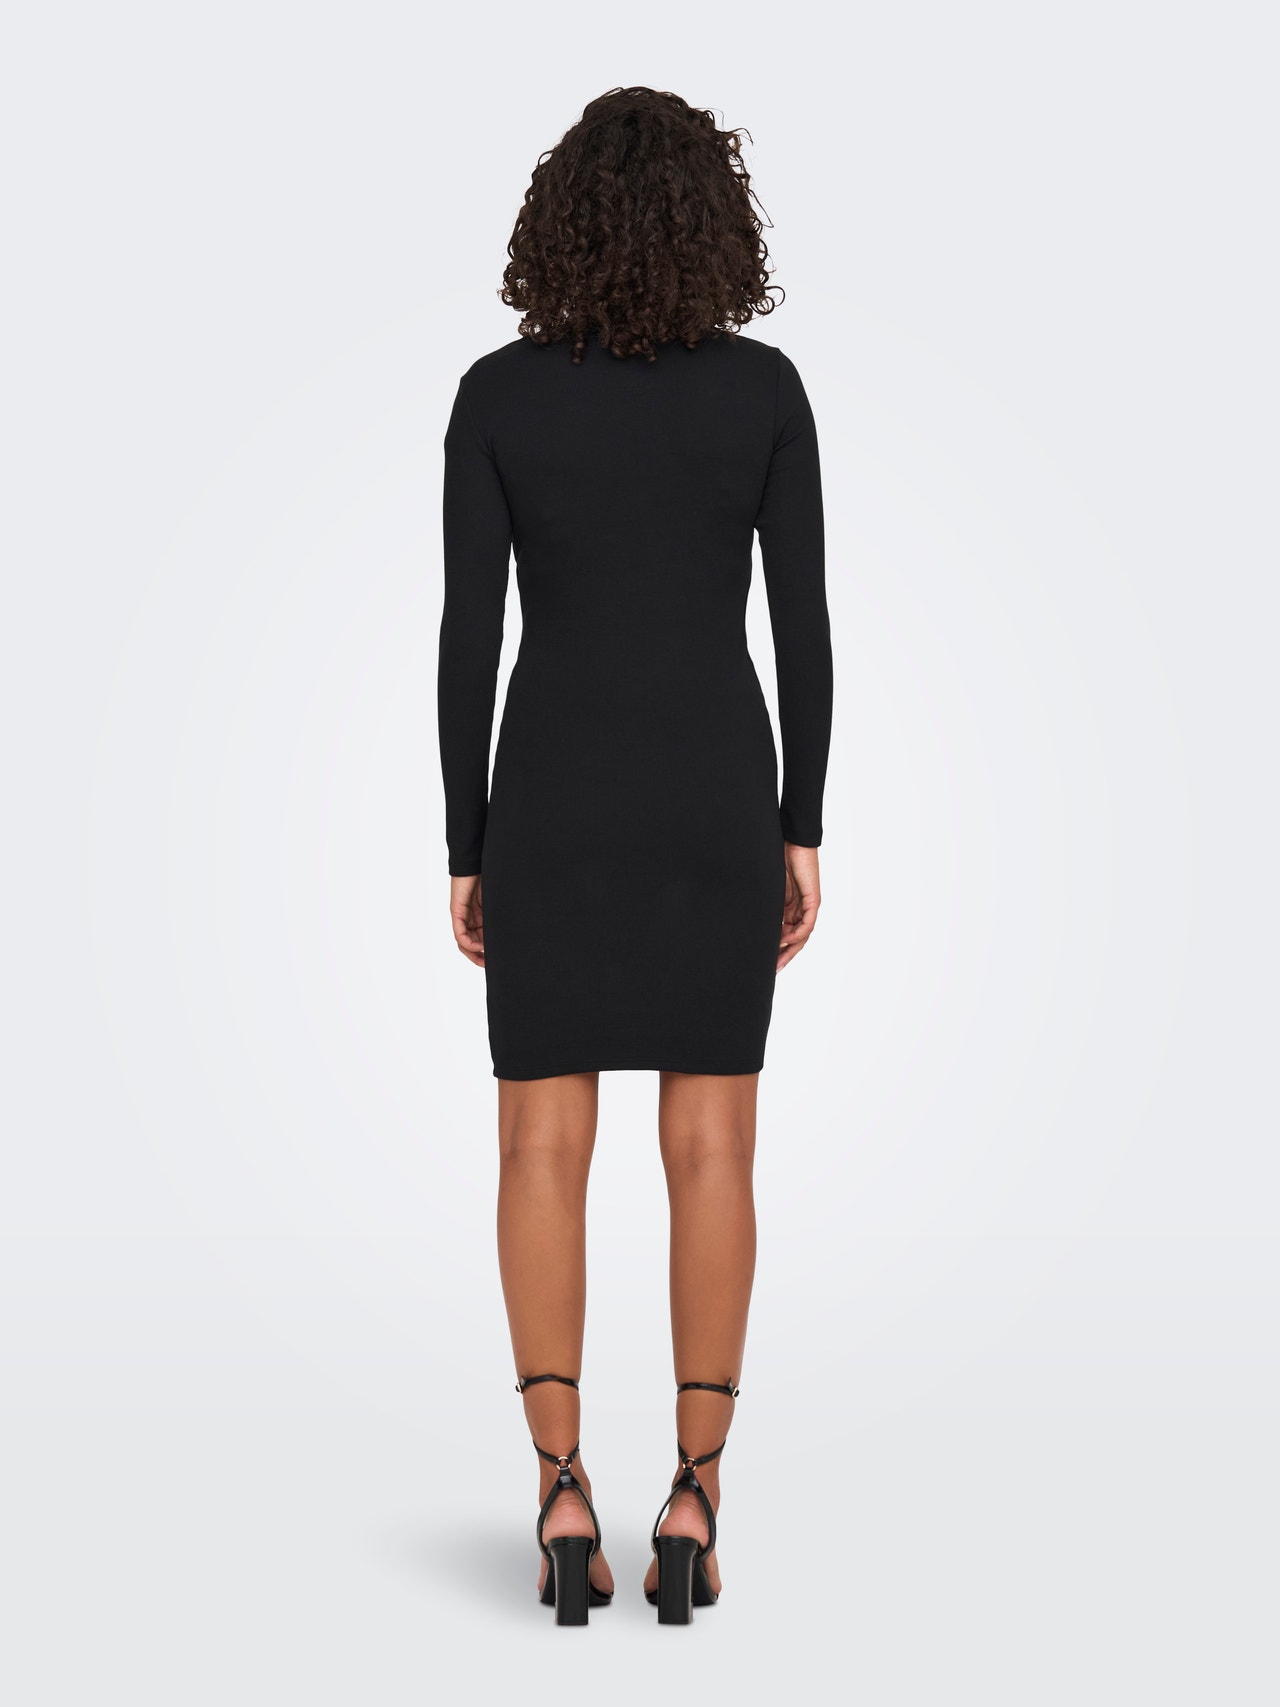 ONLY Mama cut-out detail dress -Black - 15302355